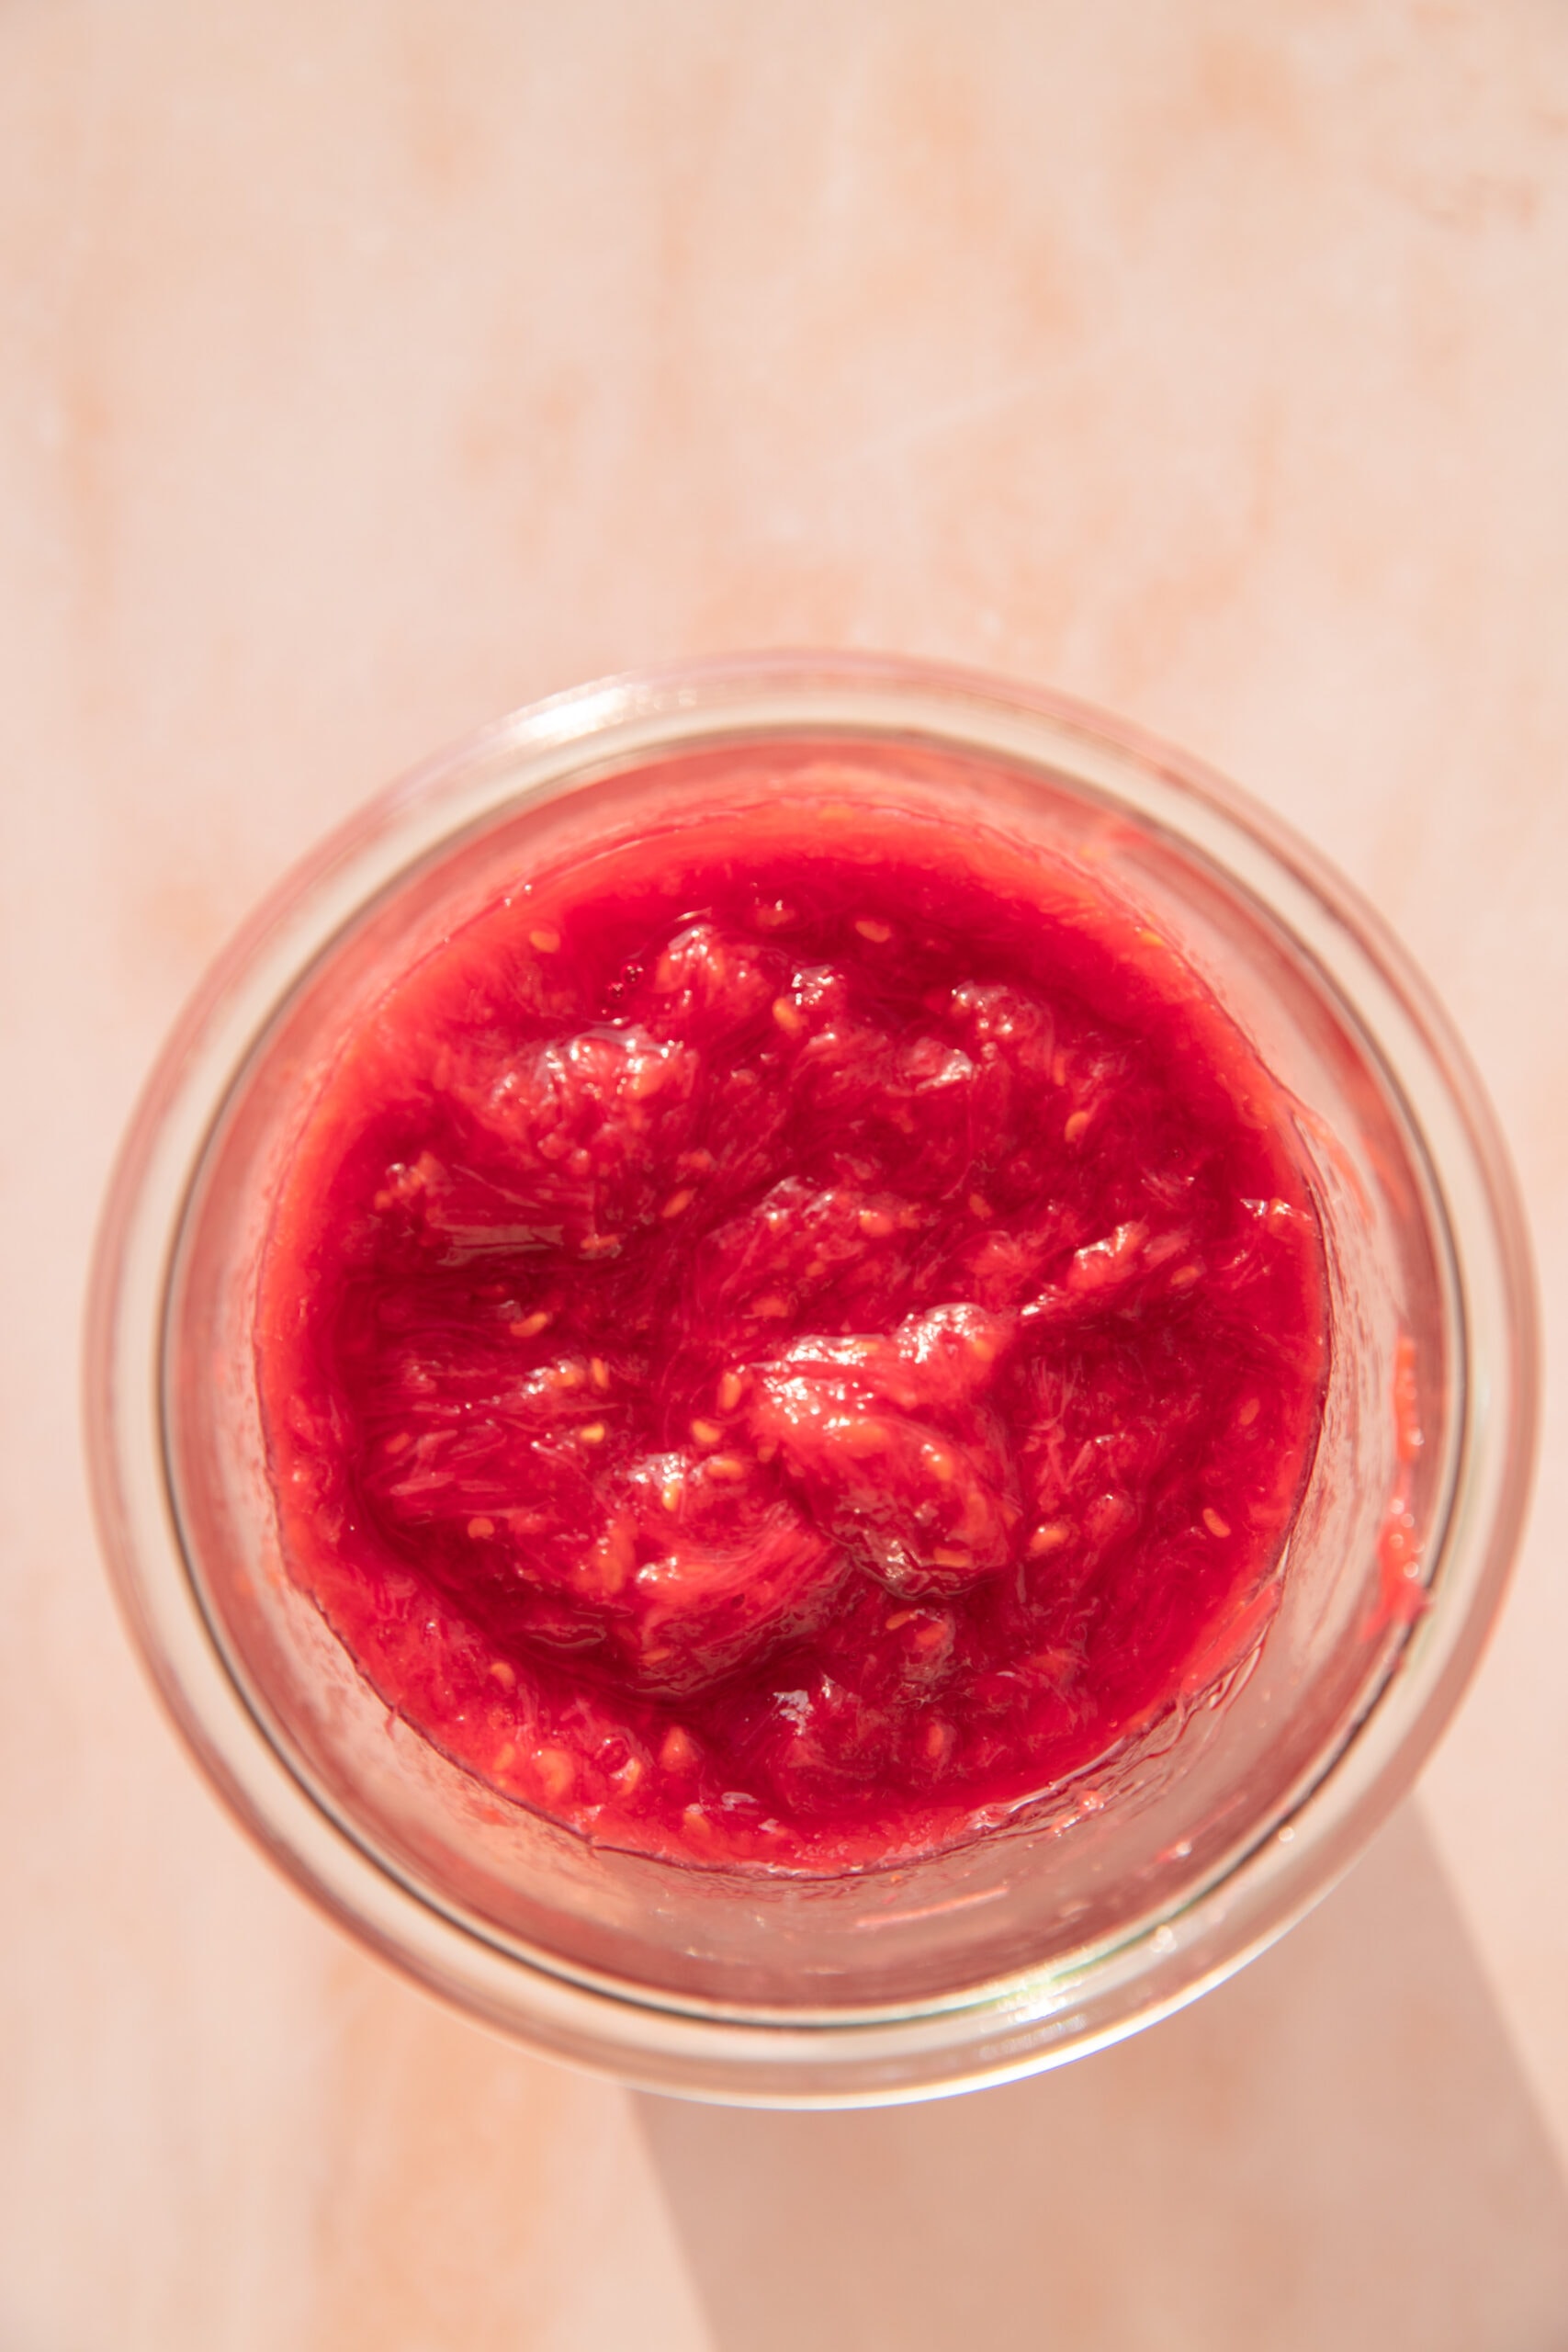 Overhead view of rhubarb compote in a glass jar. 